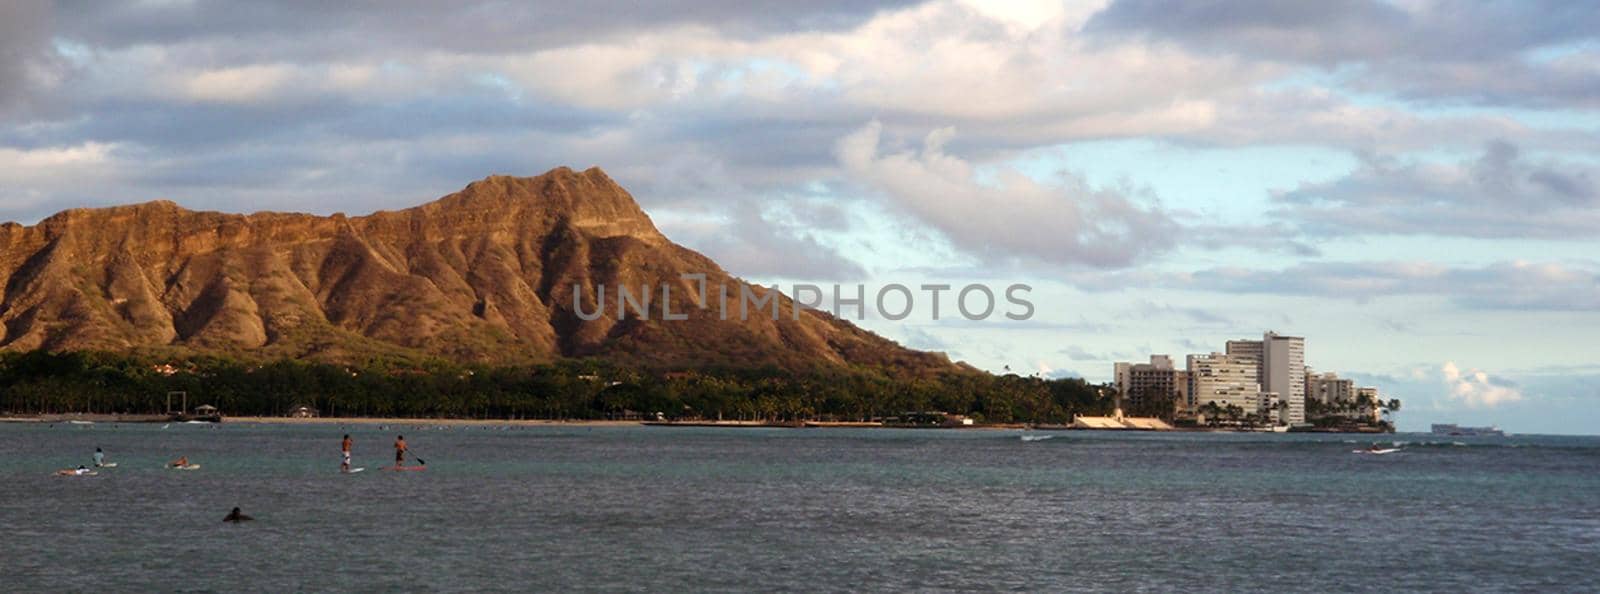 Diamondhead with surfers and Paddle boarders by EricGBVD